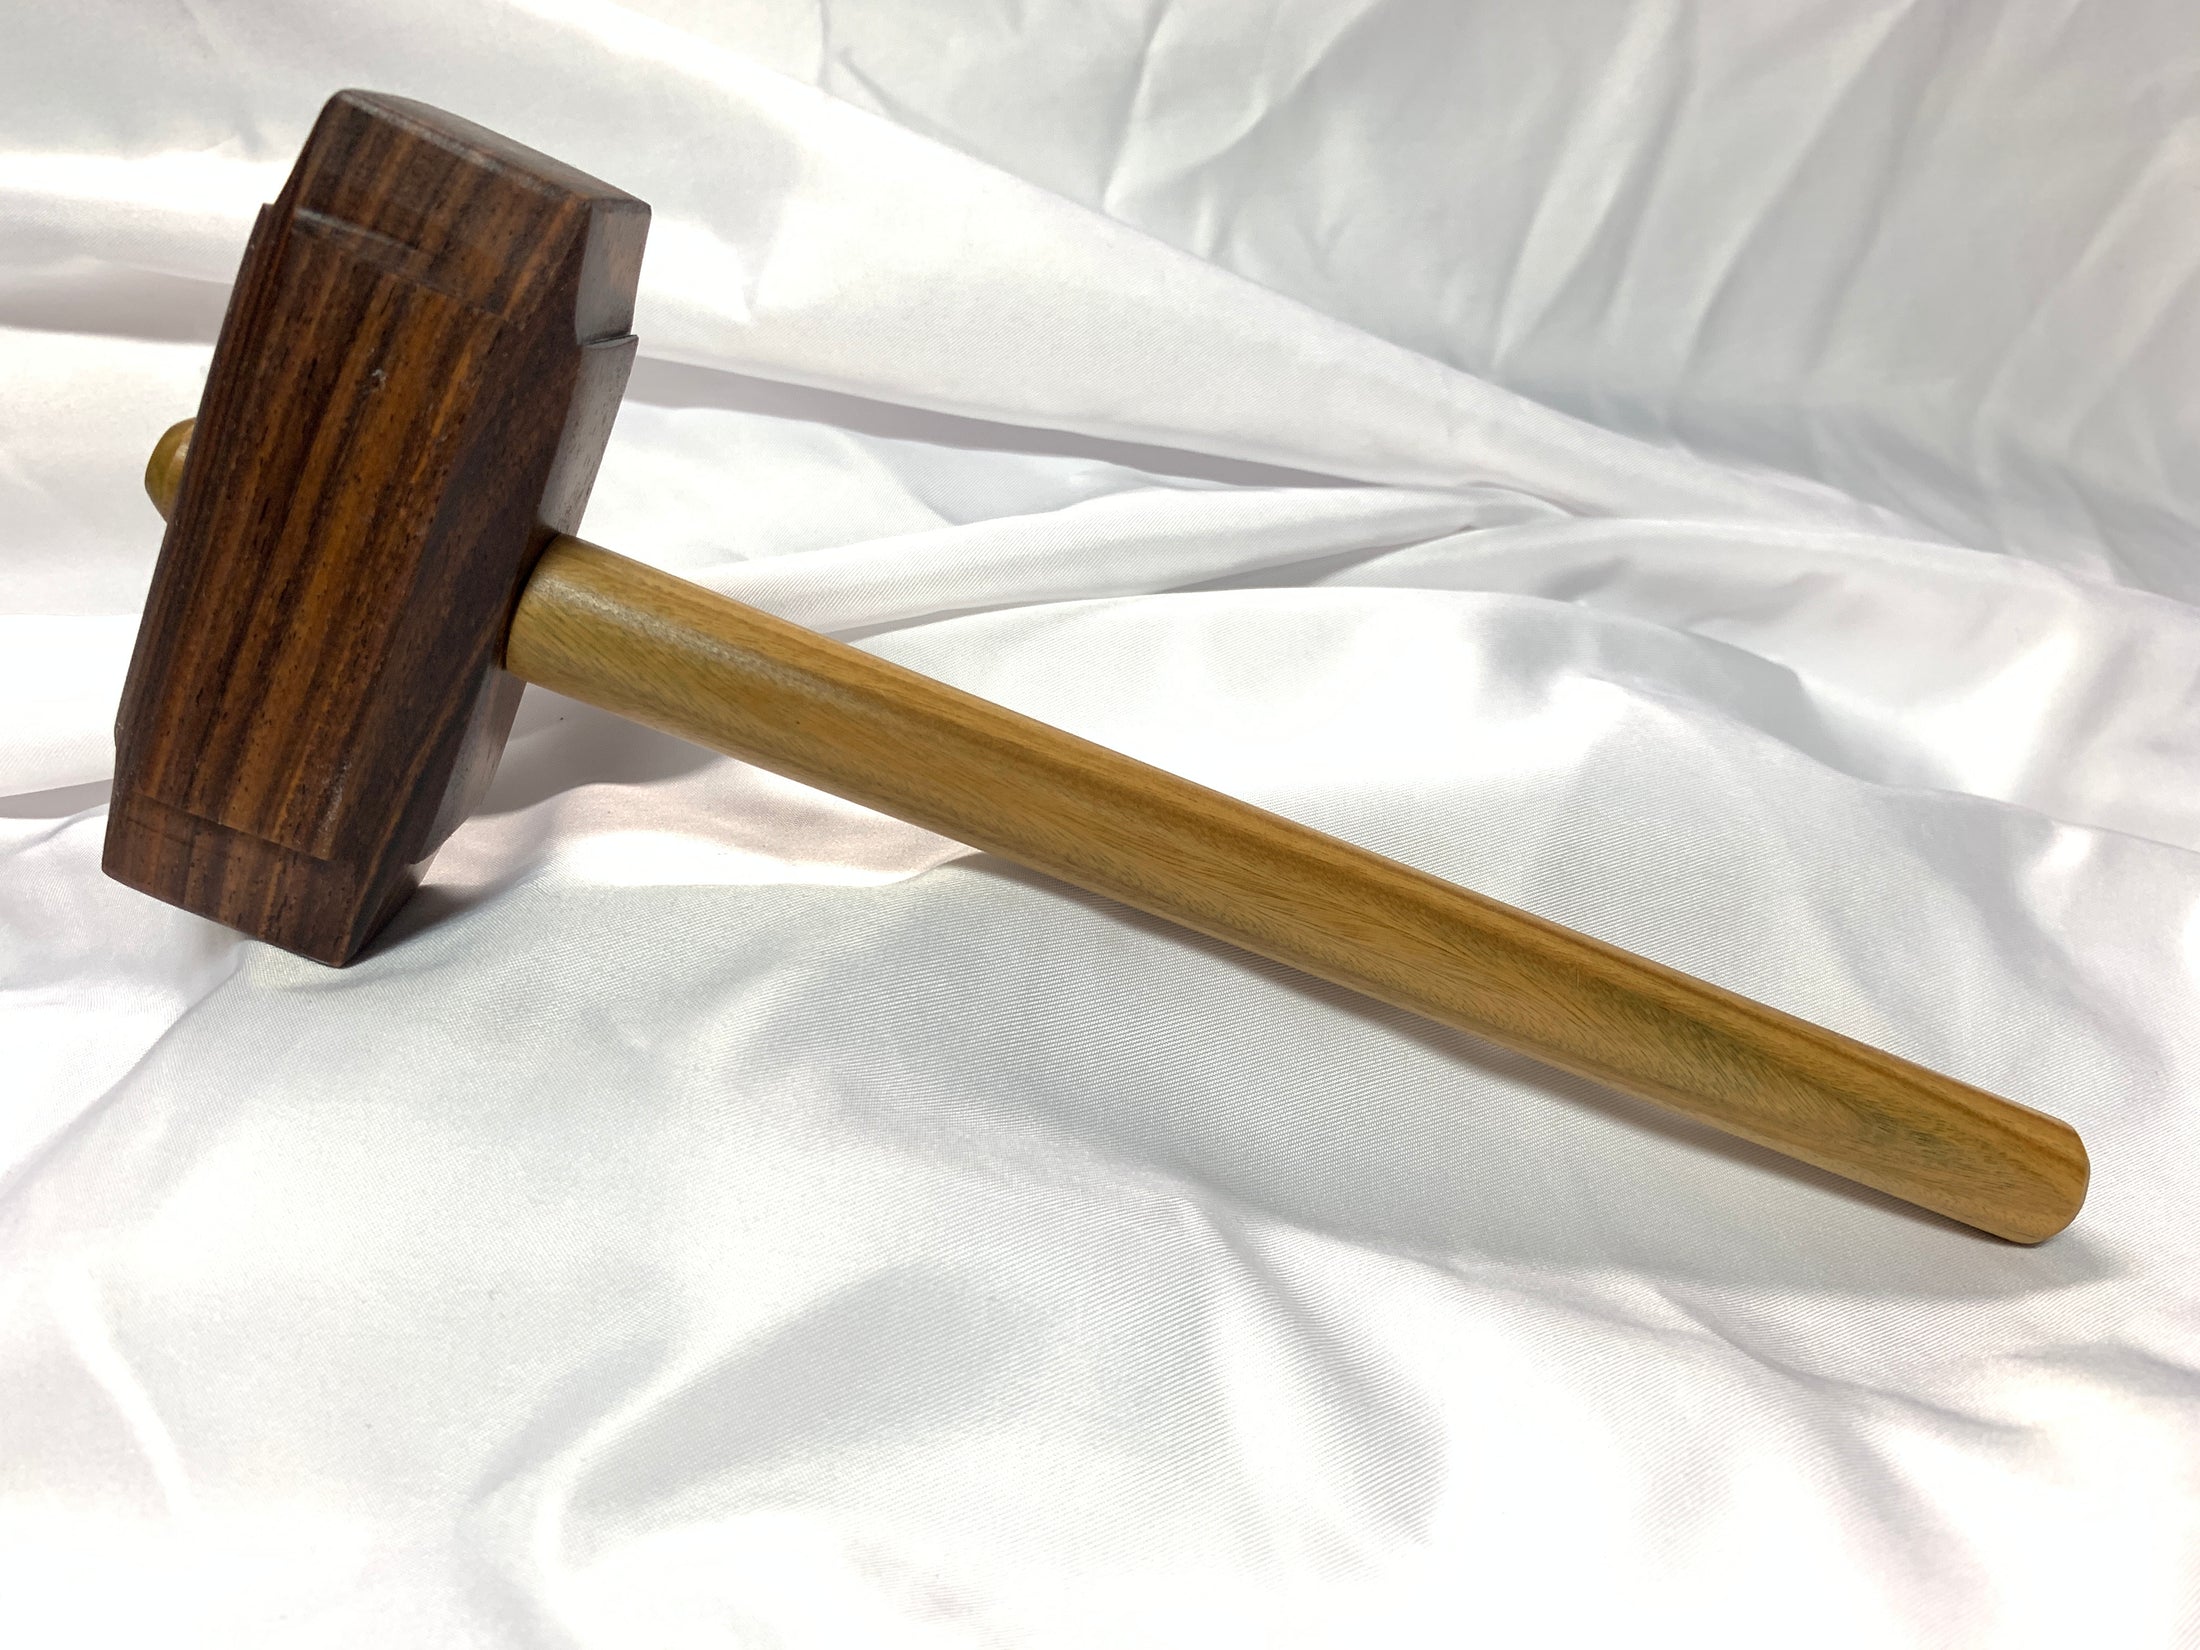 Thors Hammer Woodworking Mallet Cocobolo Head with Lignum Vitae Handle Kings Fine Woodworking